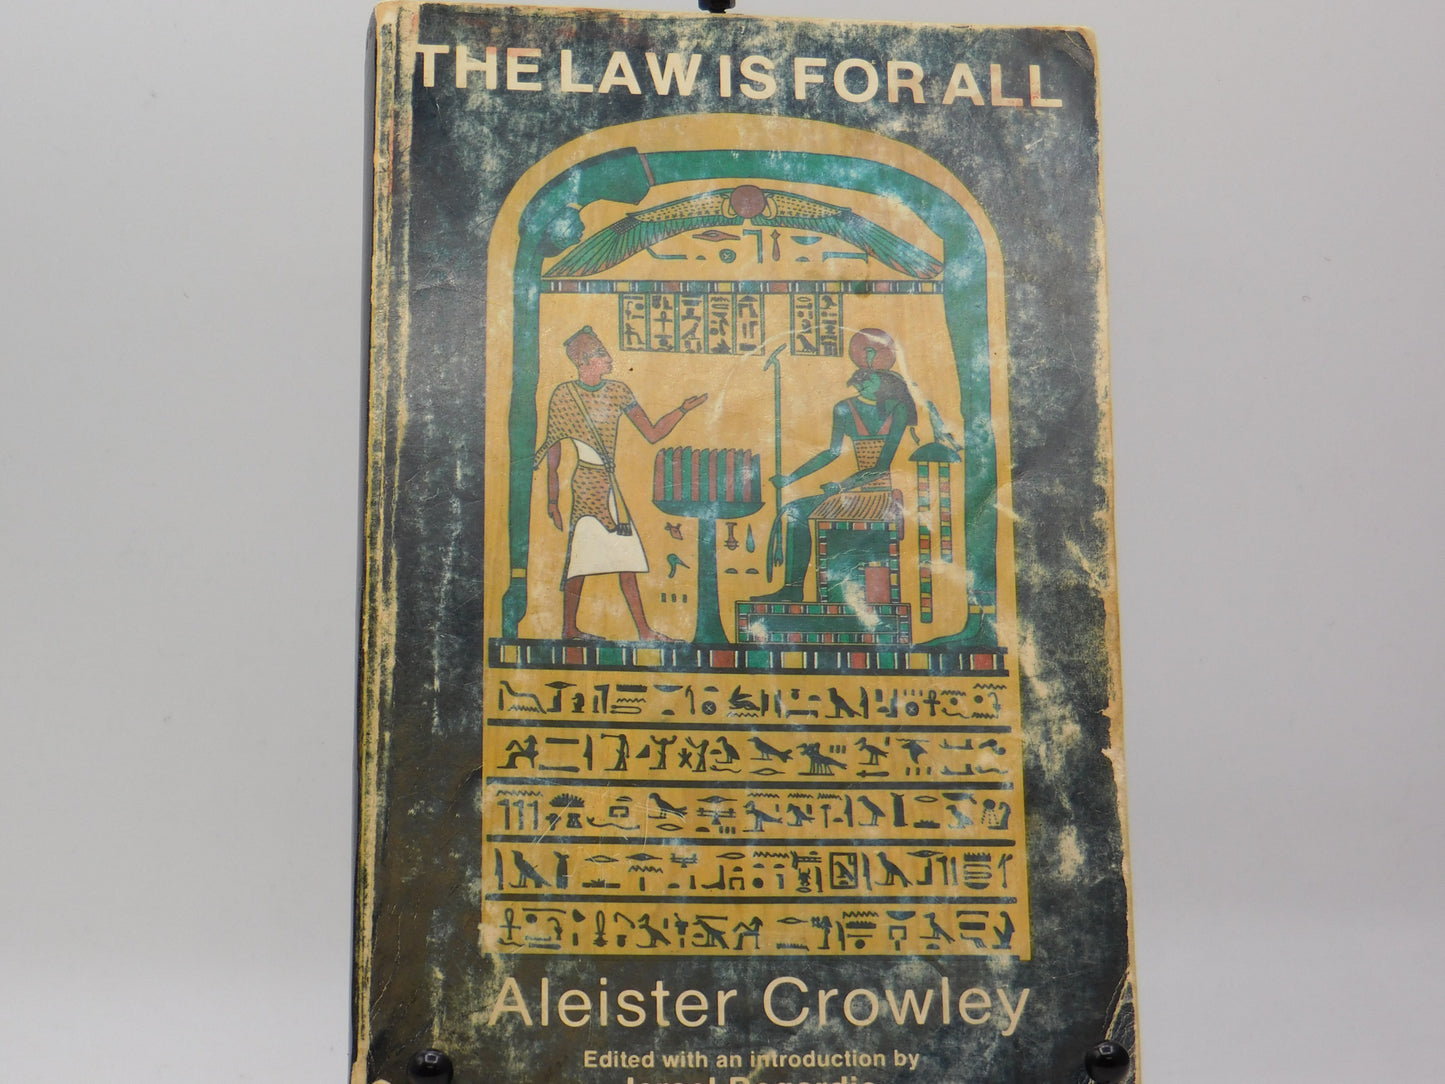 The Law is For All by Aleister Crowley